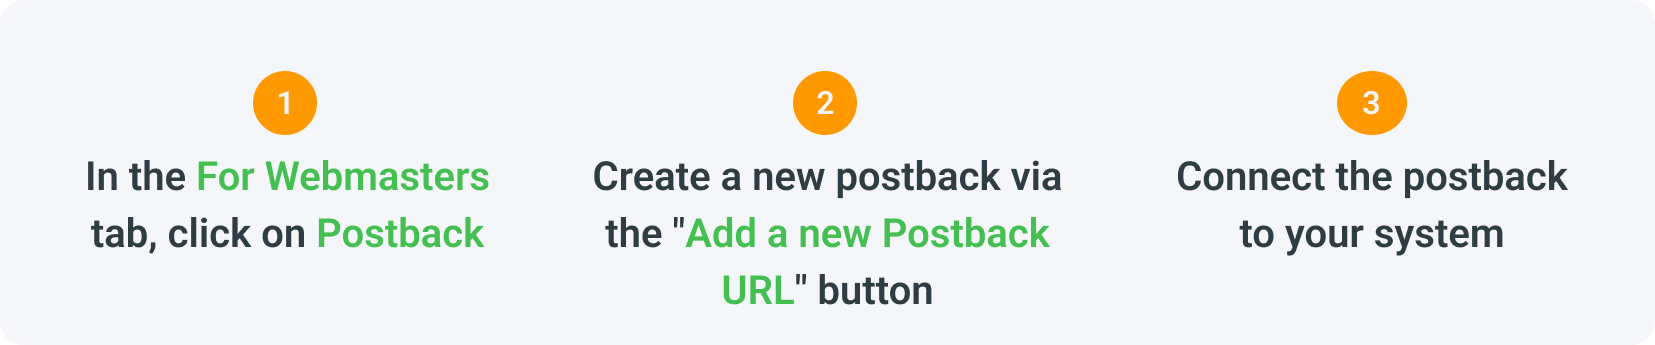 Sub-affiliate networks are connected to the affiliate network by postback integration.